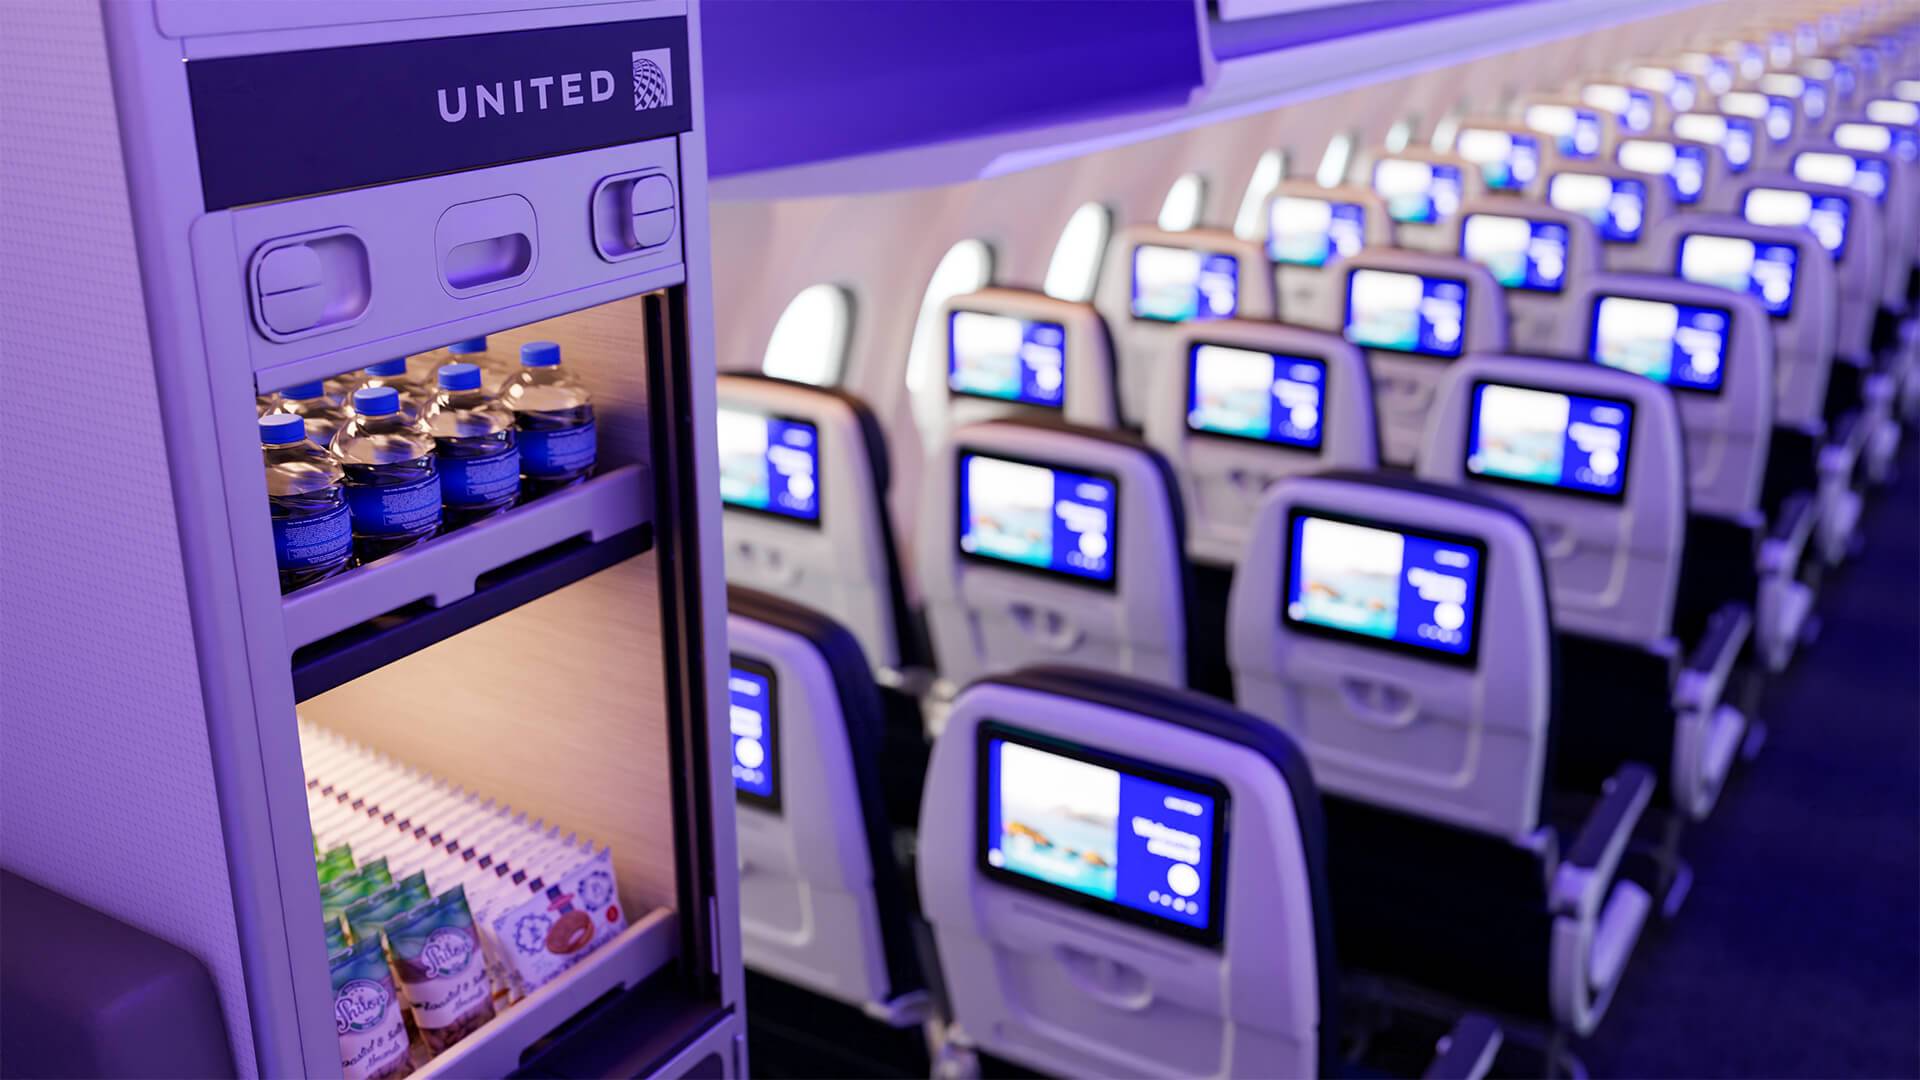 United Airlines A321neo cabin interior, water and snack caddy